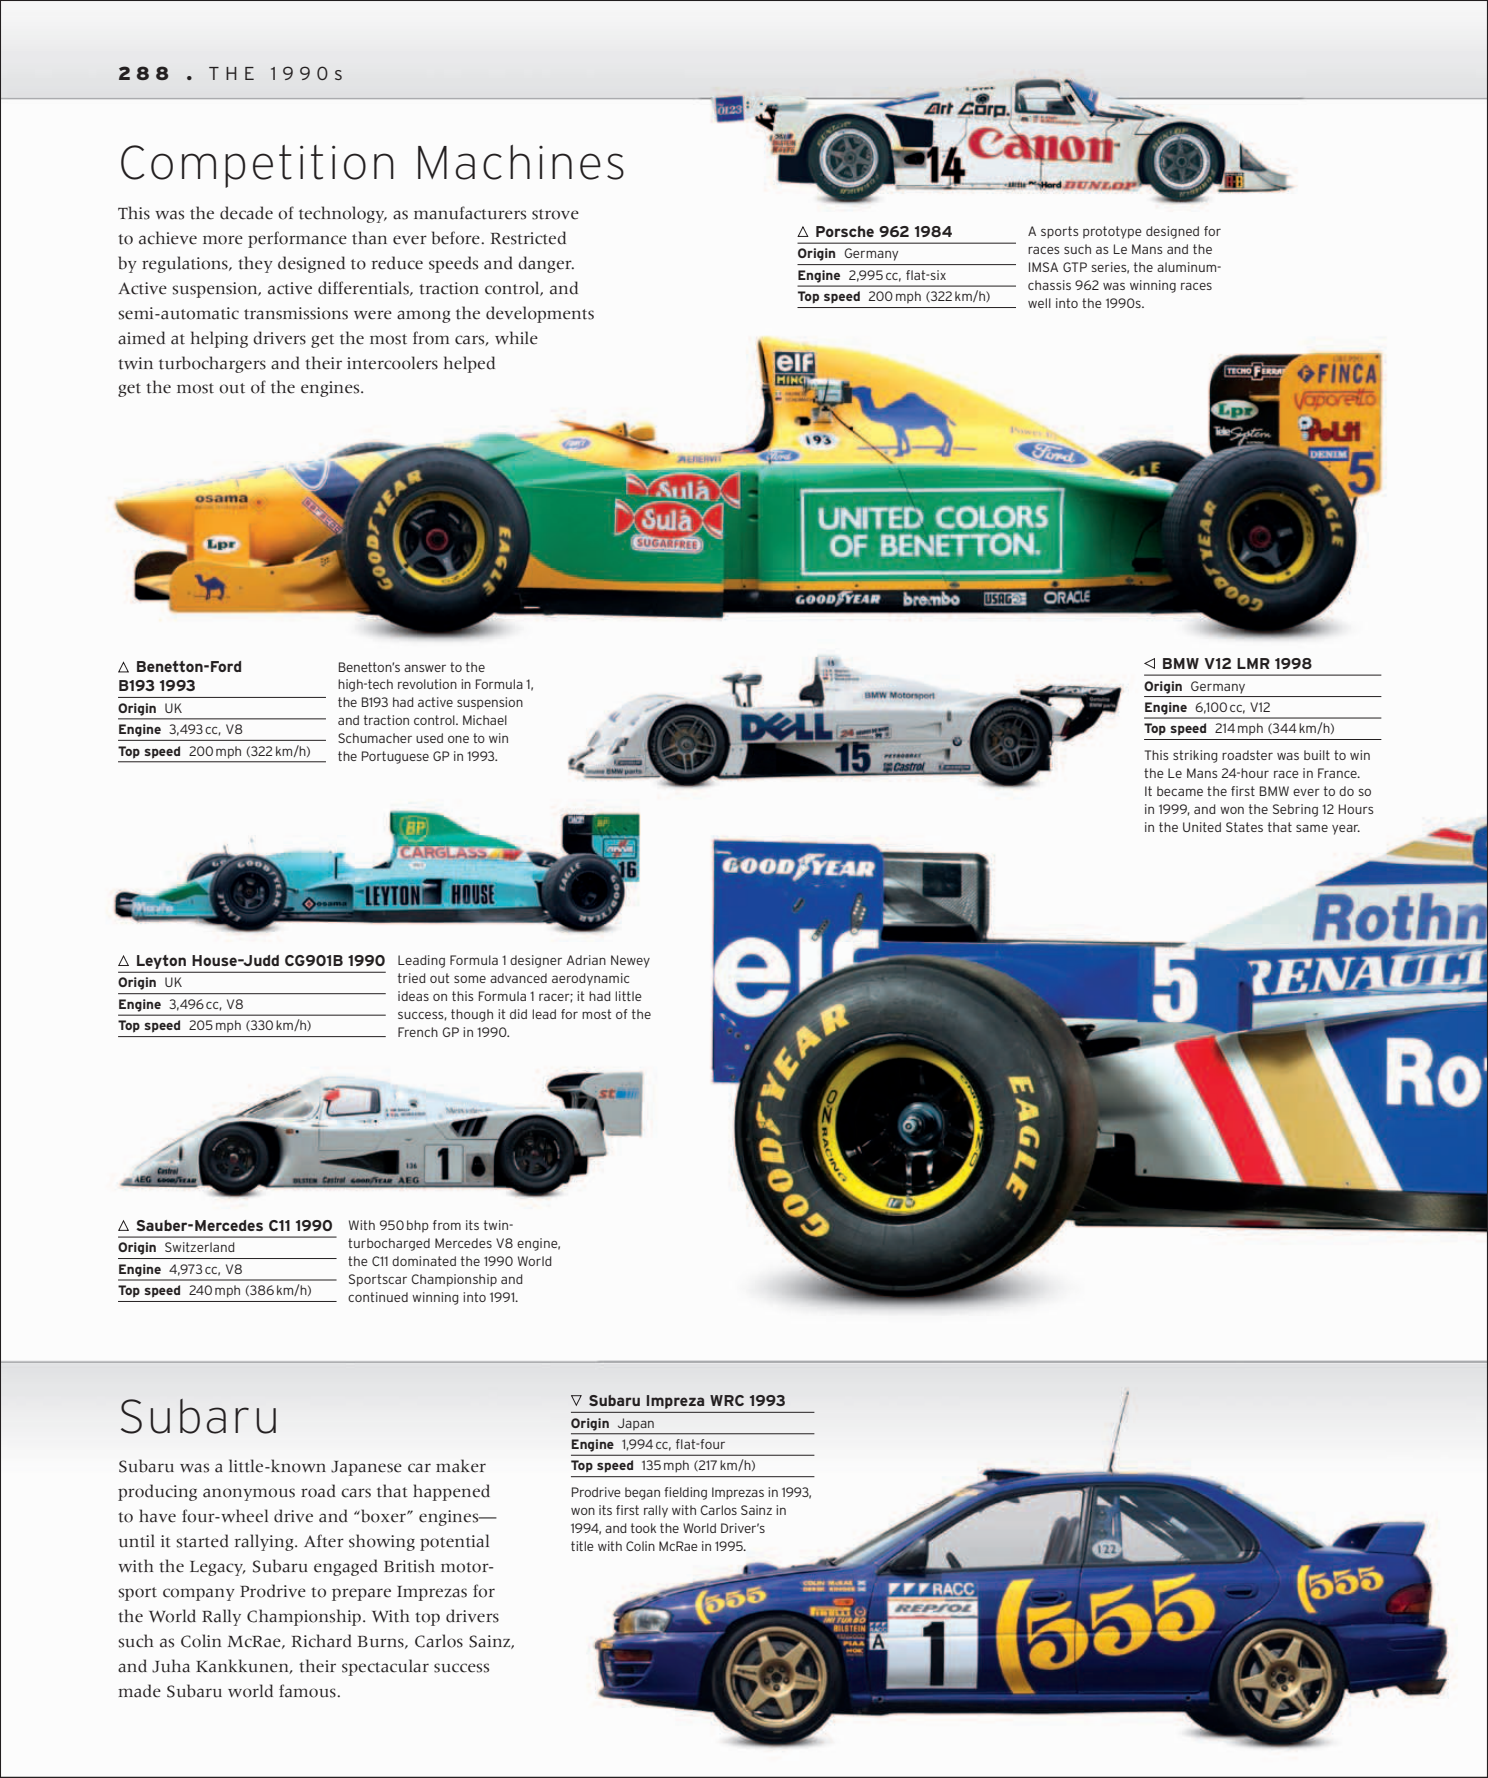 Car%20-%20The%20Definitive%20Visual%20History%20of%20the%20Automobile_290.png